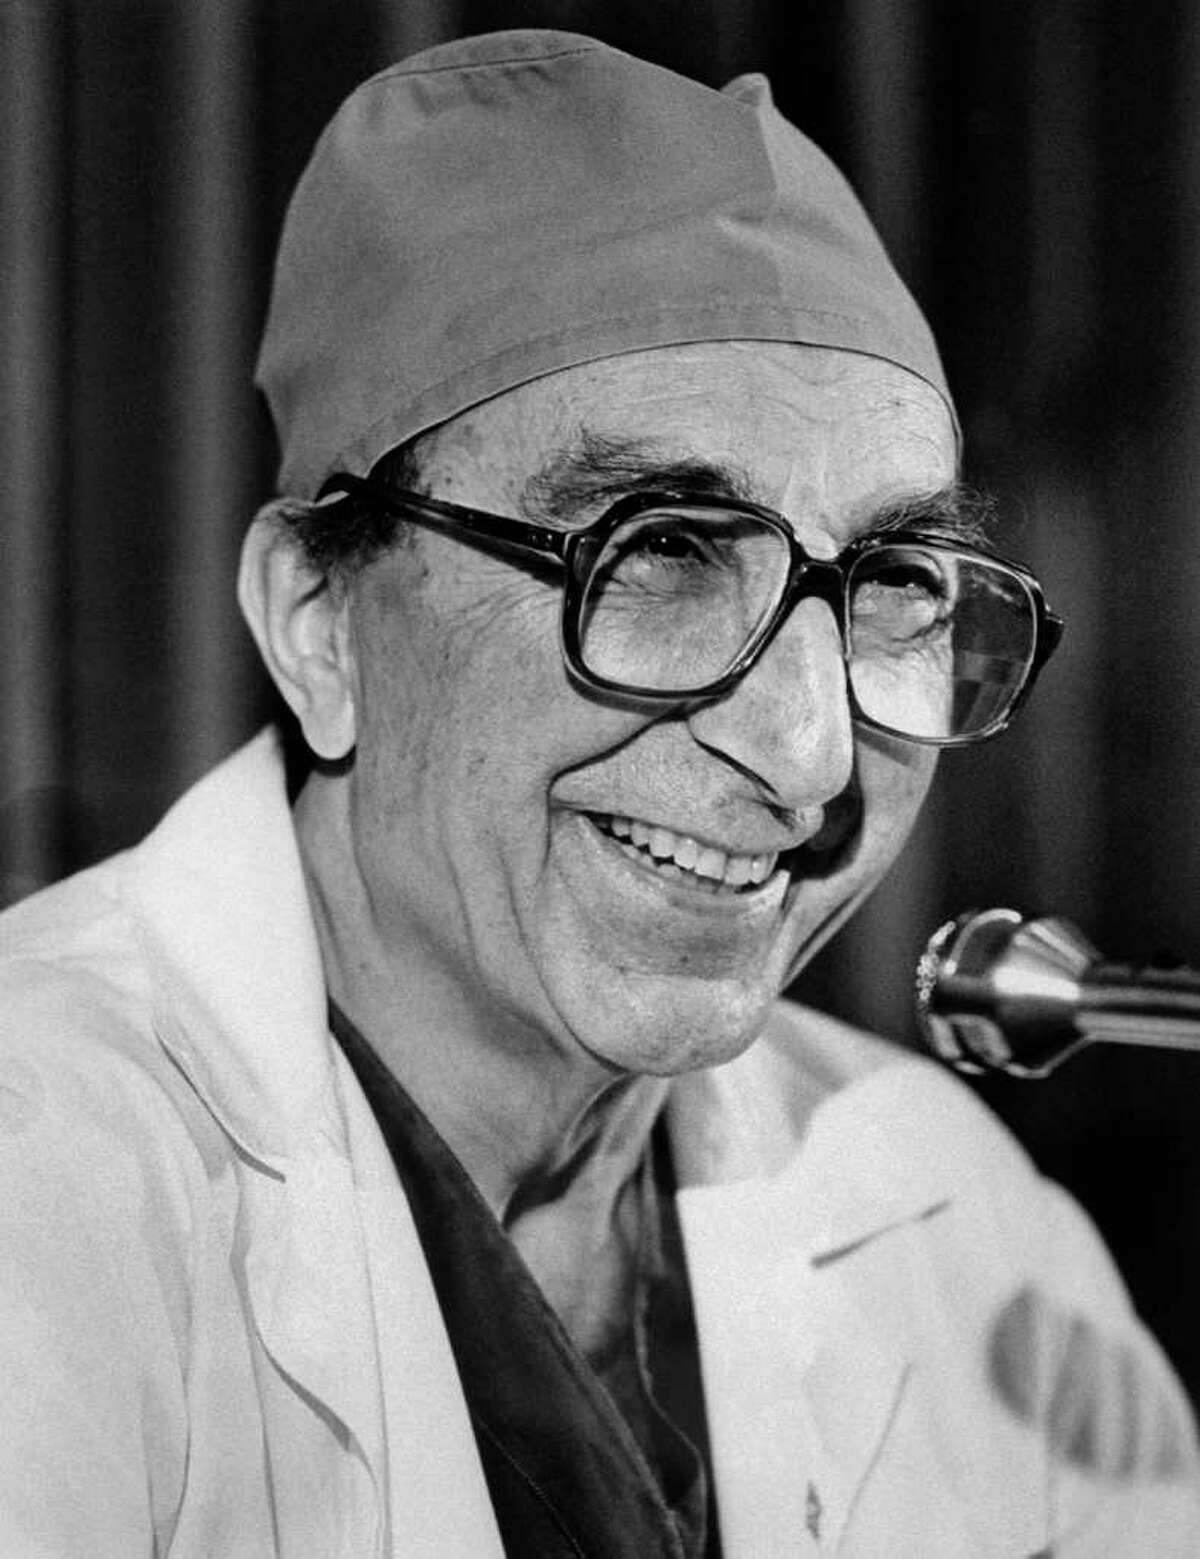 Dr. Michael DeBakey speaks in 1980 after returning from Egypt, where he operated on the deposed shah of Iran.